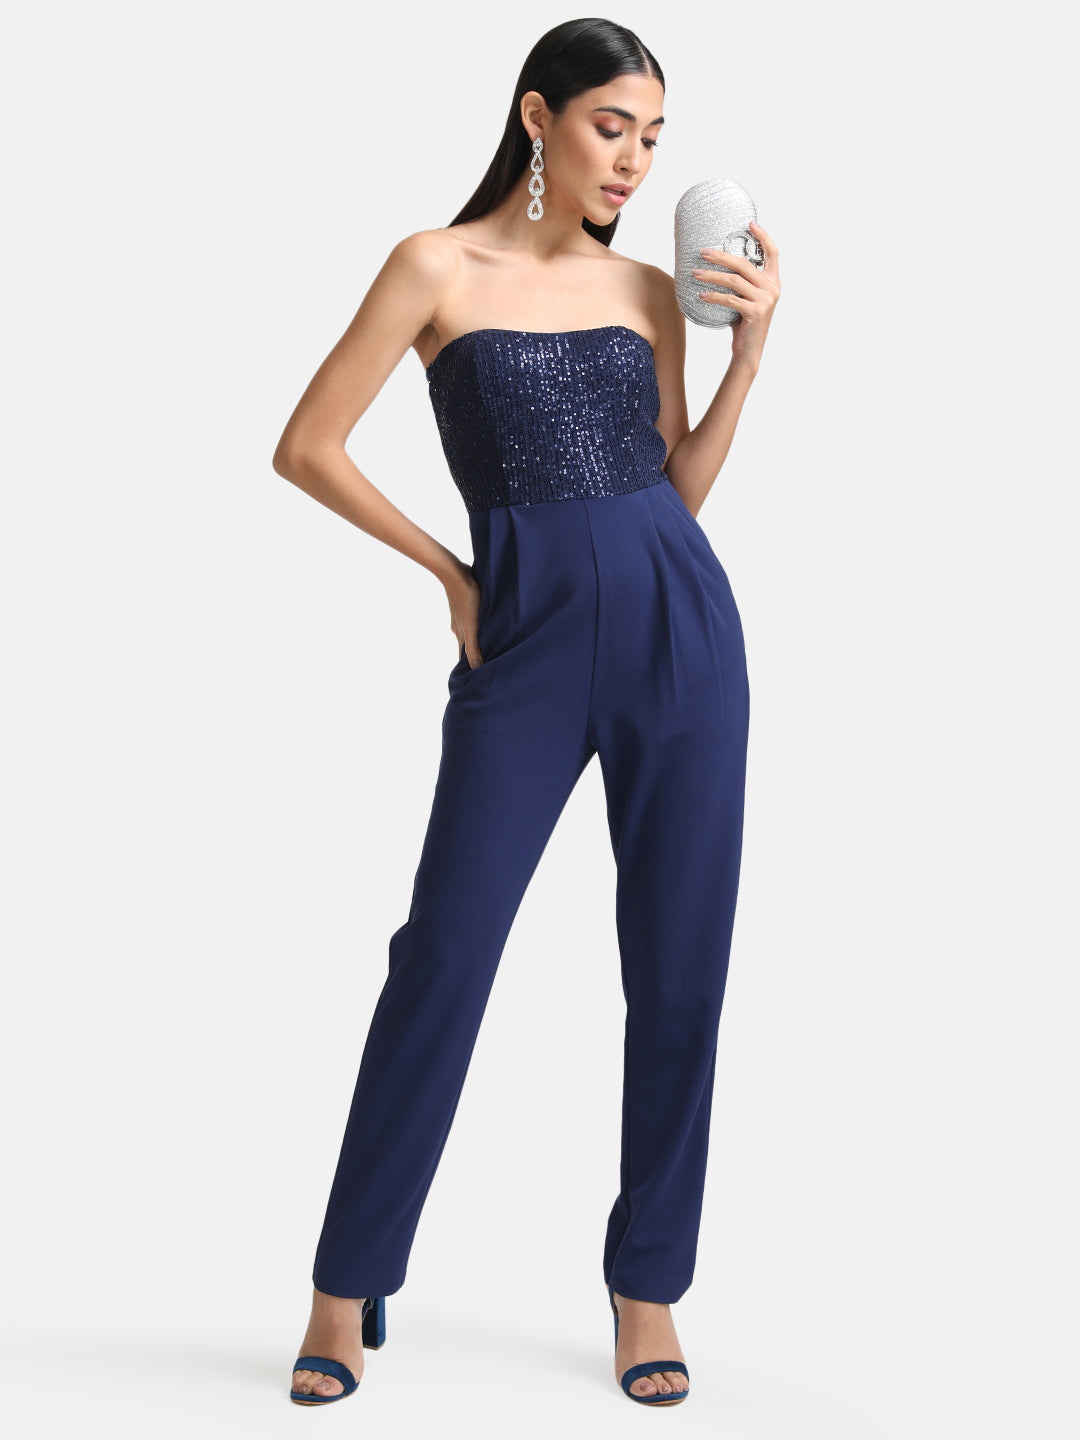 Miss Chase A Beautiful Morning Sequined Jumpsuit Off-White For Women